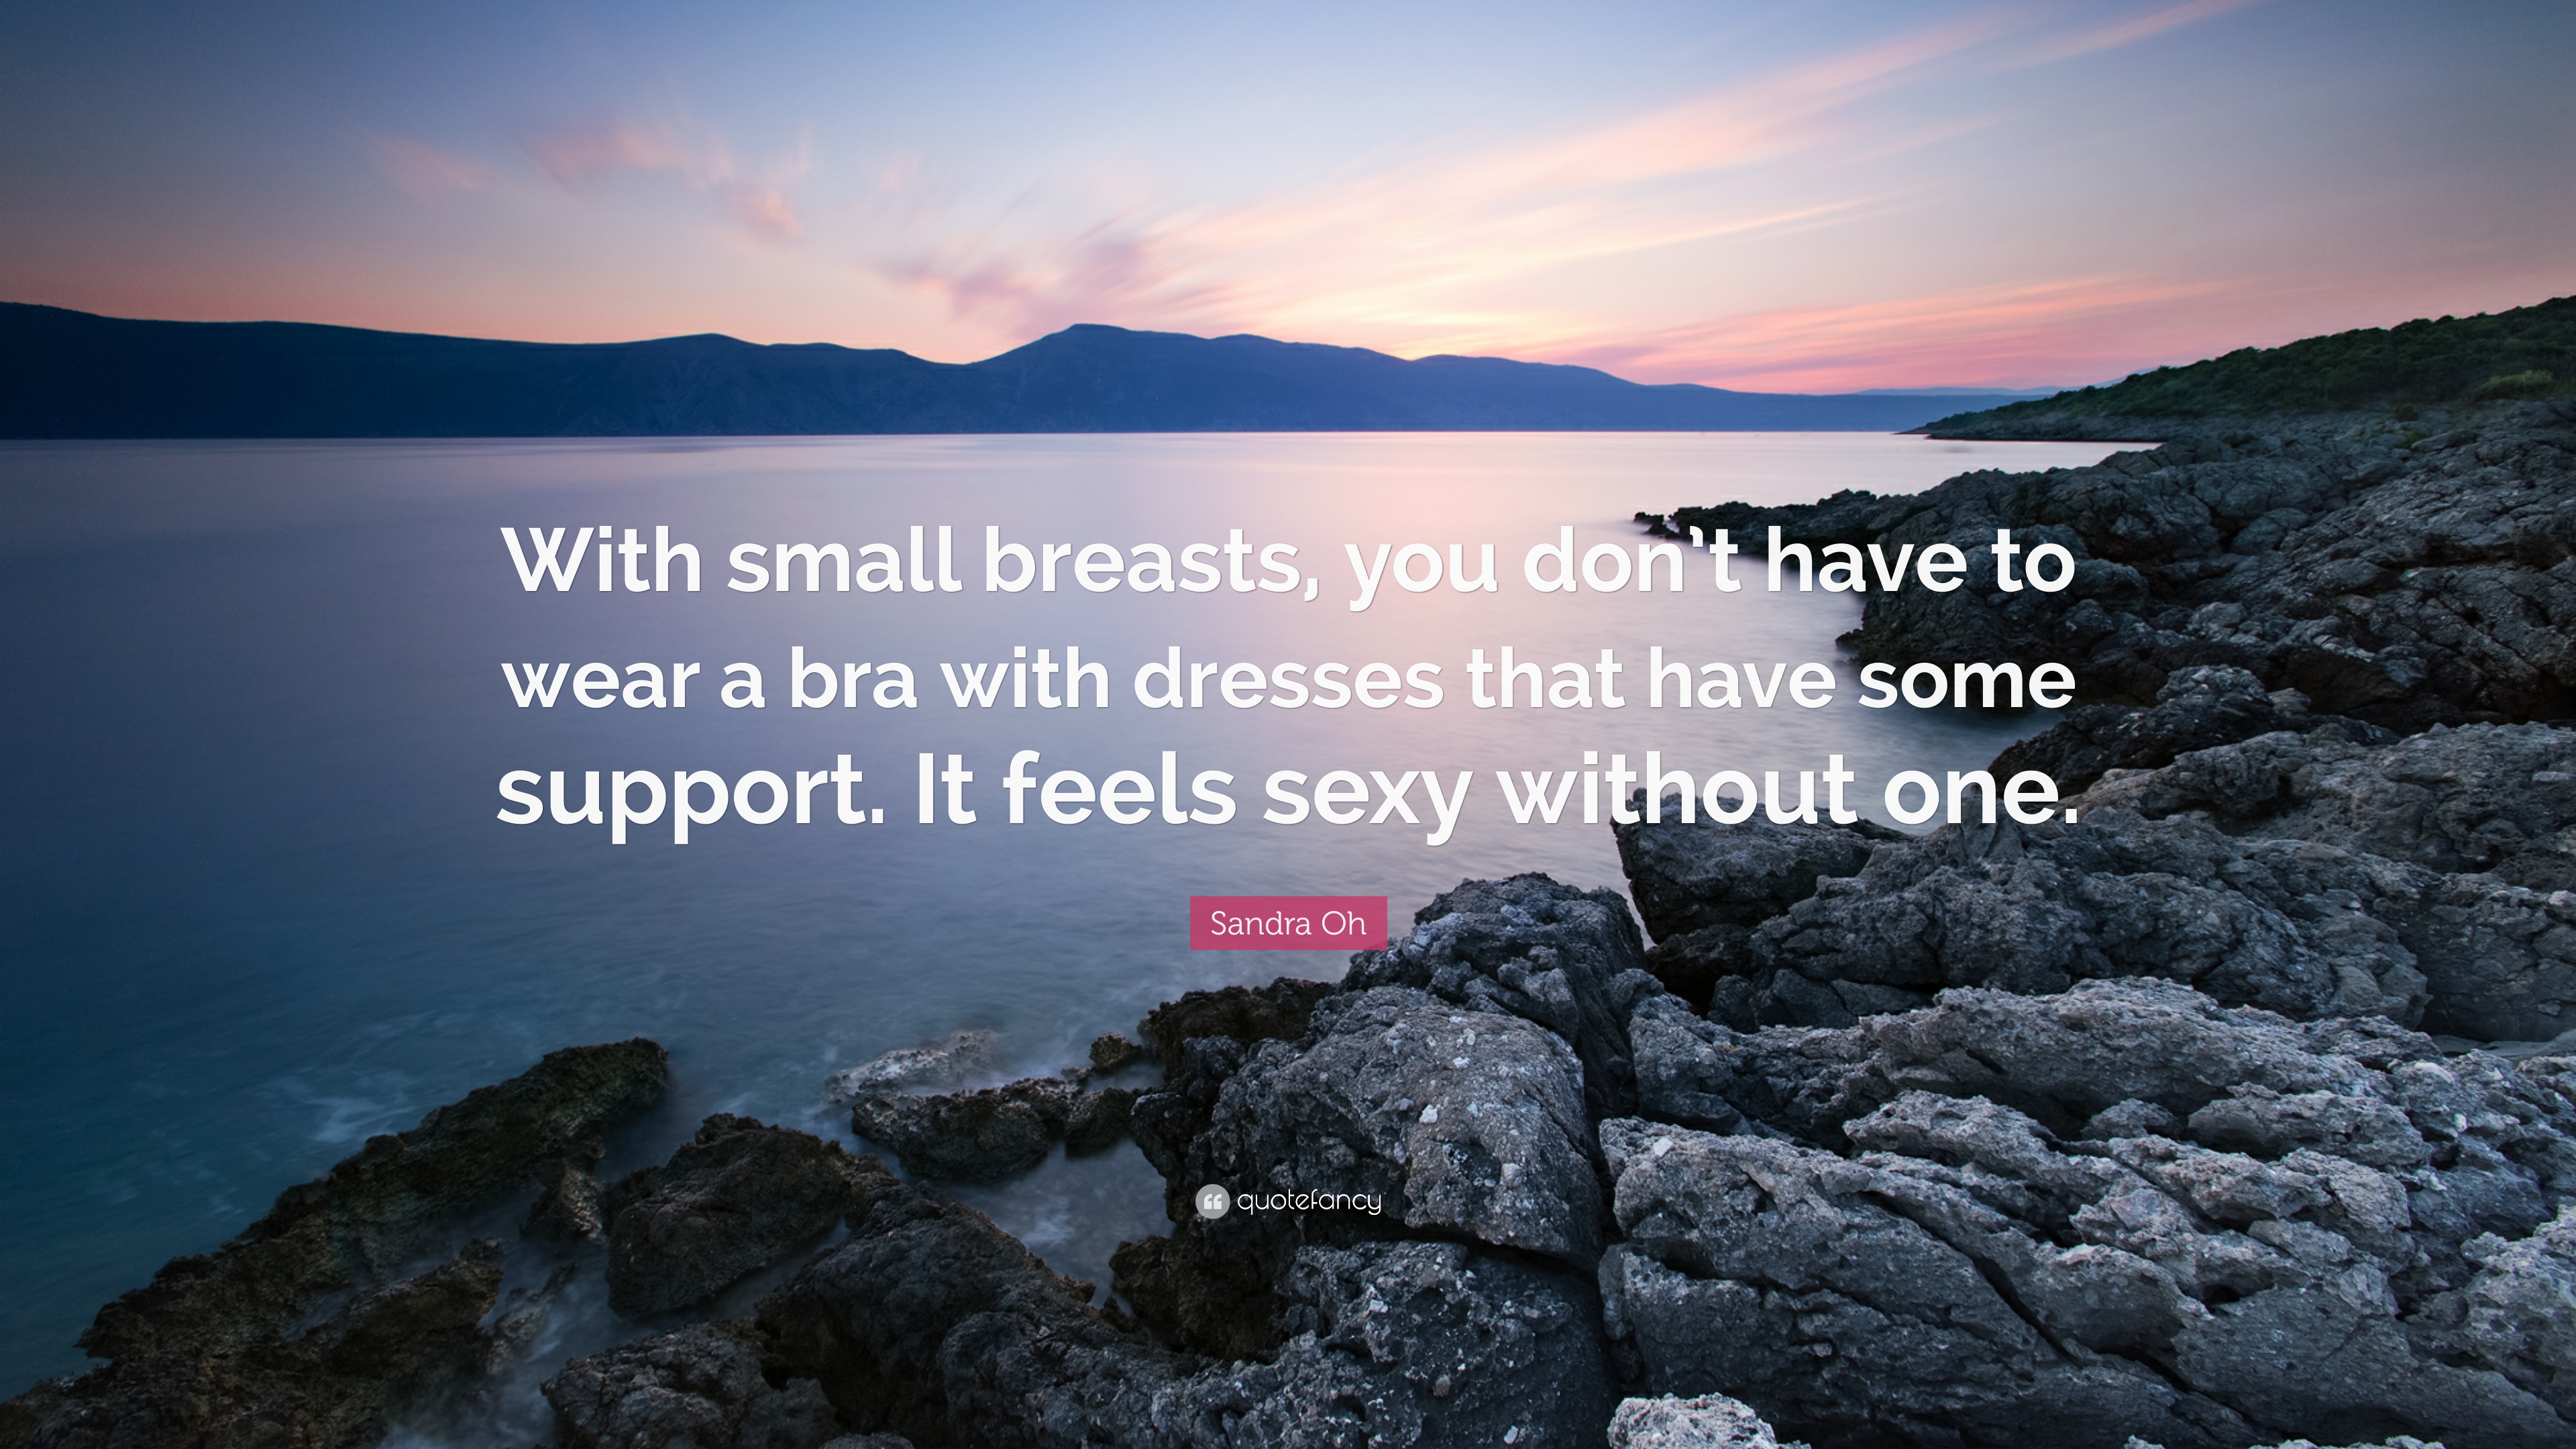 Sandra Oh Quote: “With small breasts, you don't have to wear a bra